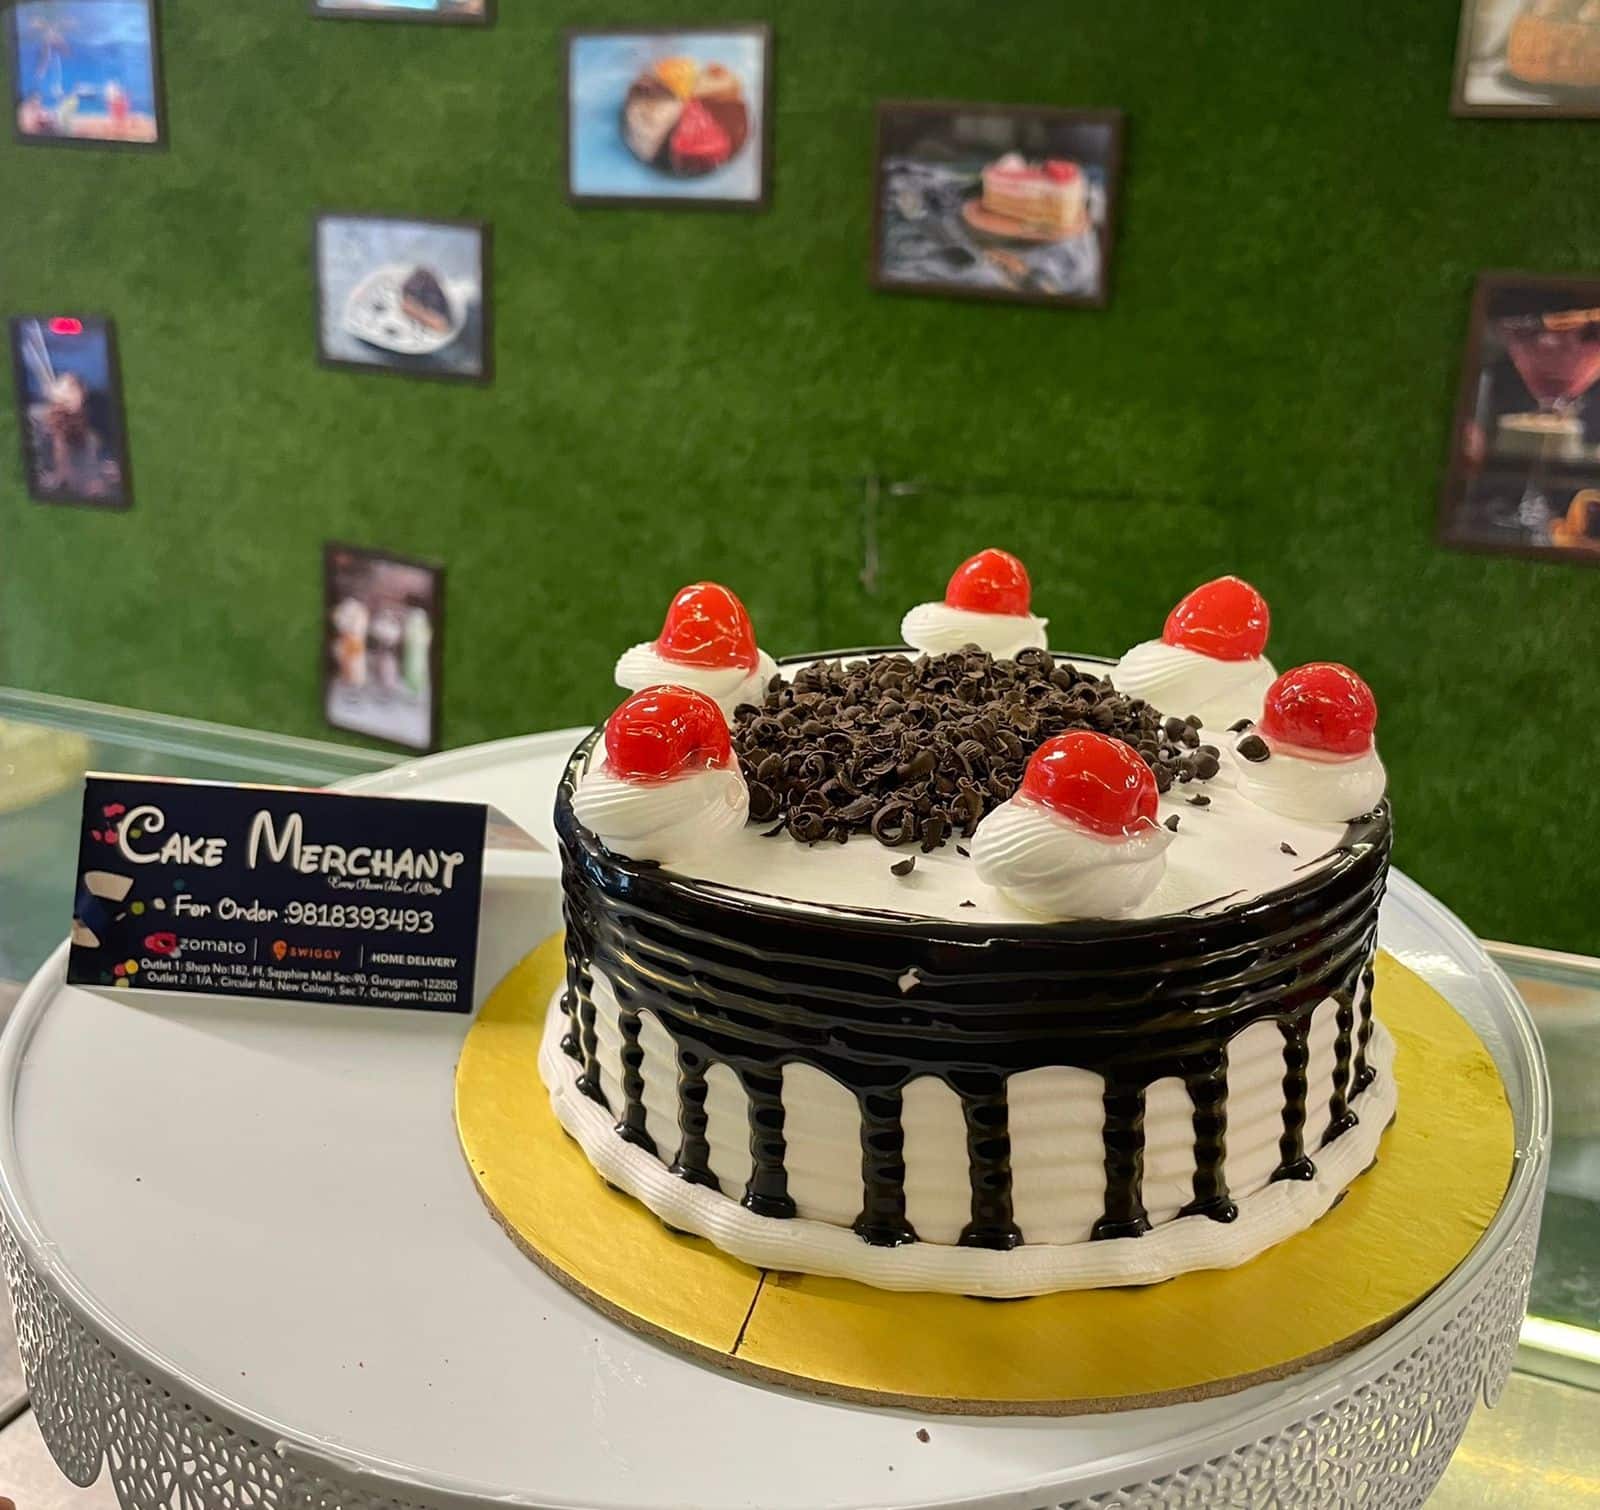 Royal Cakes And Bakes, Dhanbad Locality order online - Zomato